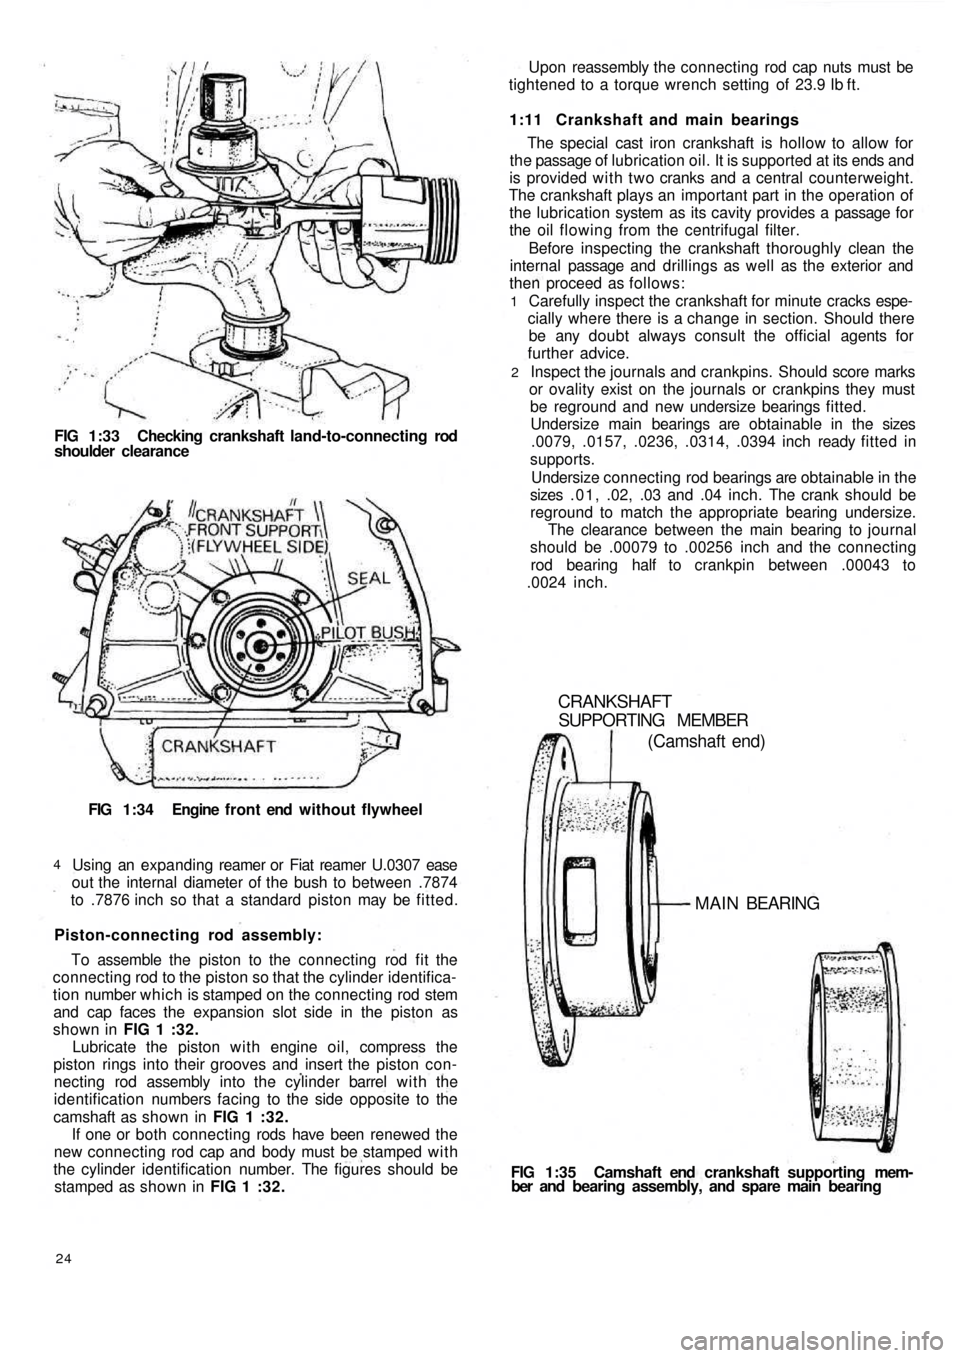 FIAT 500 1967 1.G Workshop Manual FIG 1:33 Checking crankshaft land-to-connecting rod
shoulder clearance
FIG 1:34 Engine  f r o n t  end  without flywheel
Using an expanding reamer or Fiat reamer U.0307 ease
out the internal diameter 